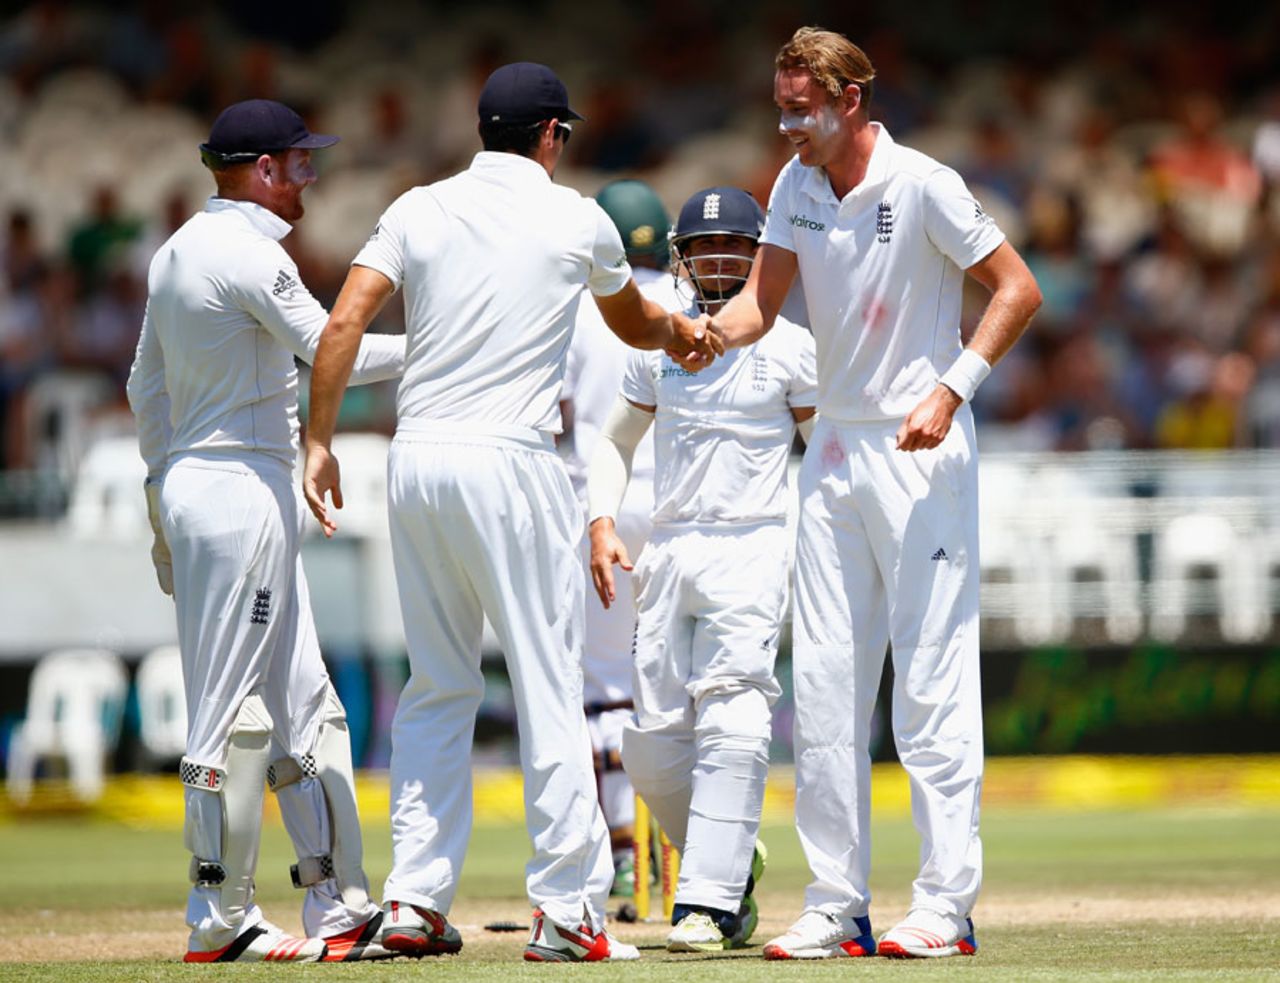 Stuart Broad gets a handshake for England's first wicket in 70 overs, South Africa v England, 2nd Test, Cape Town, 4th day, January 5, 2016